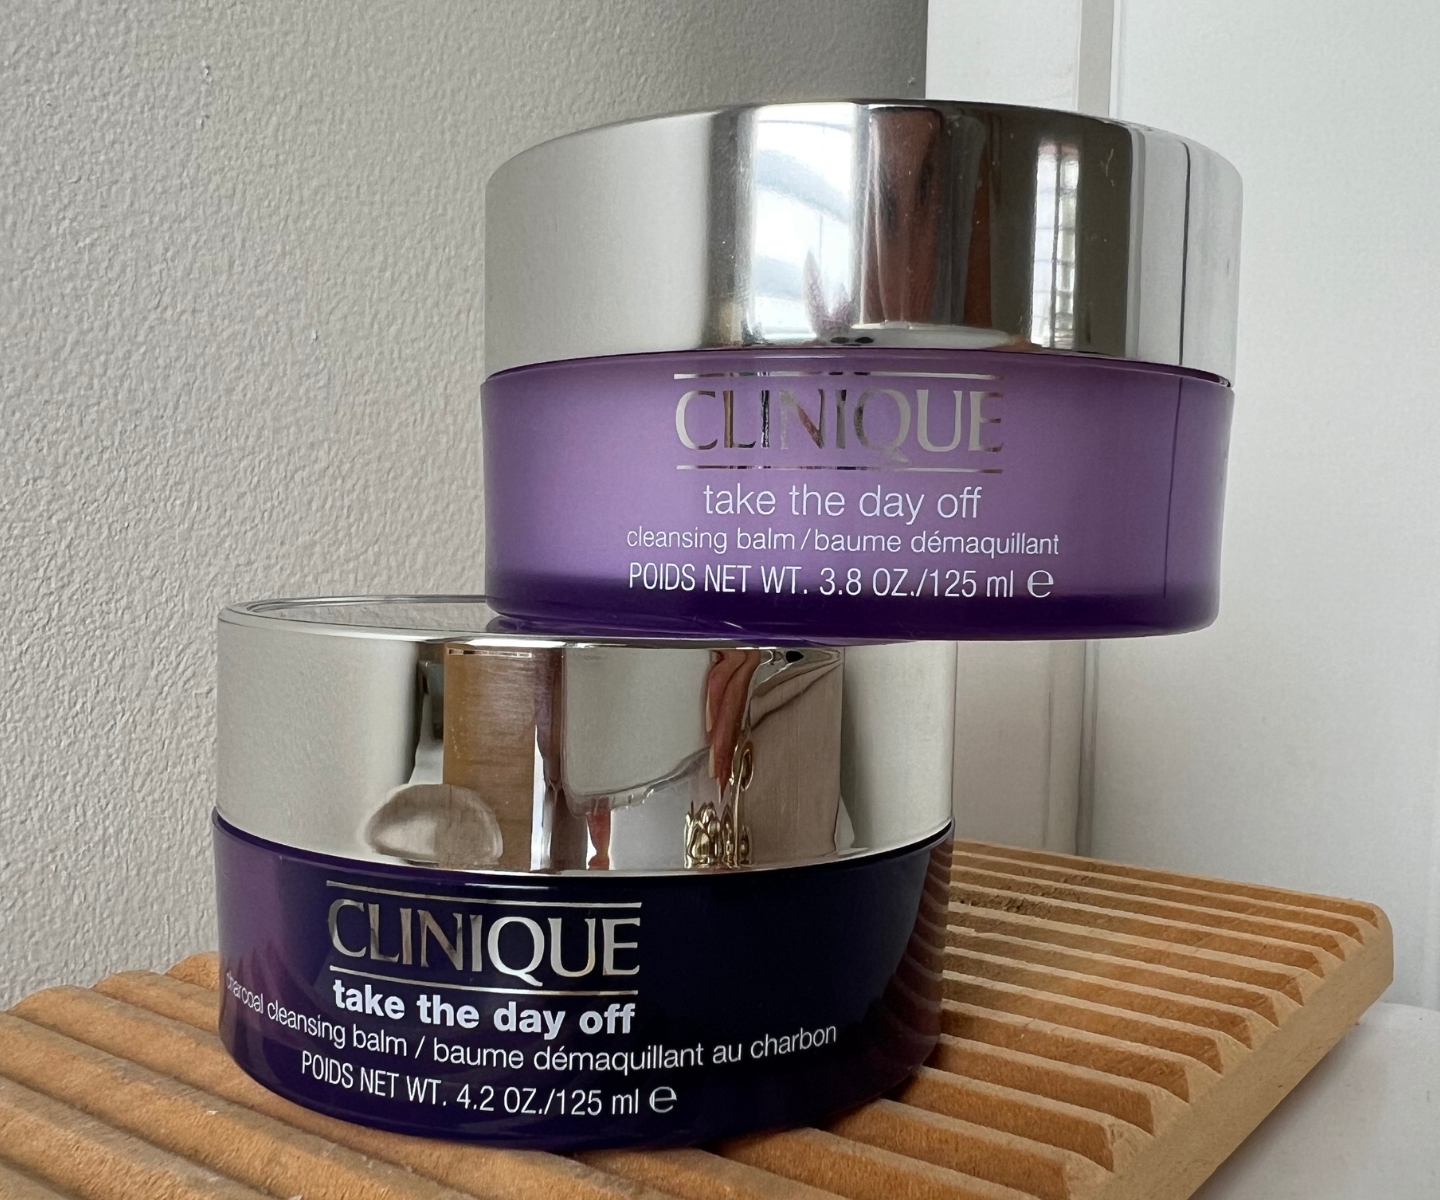 Clinique Charcoal Cleansing Balm vs Clinique Take the Day Off Cleansing Balm